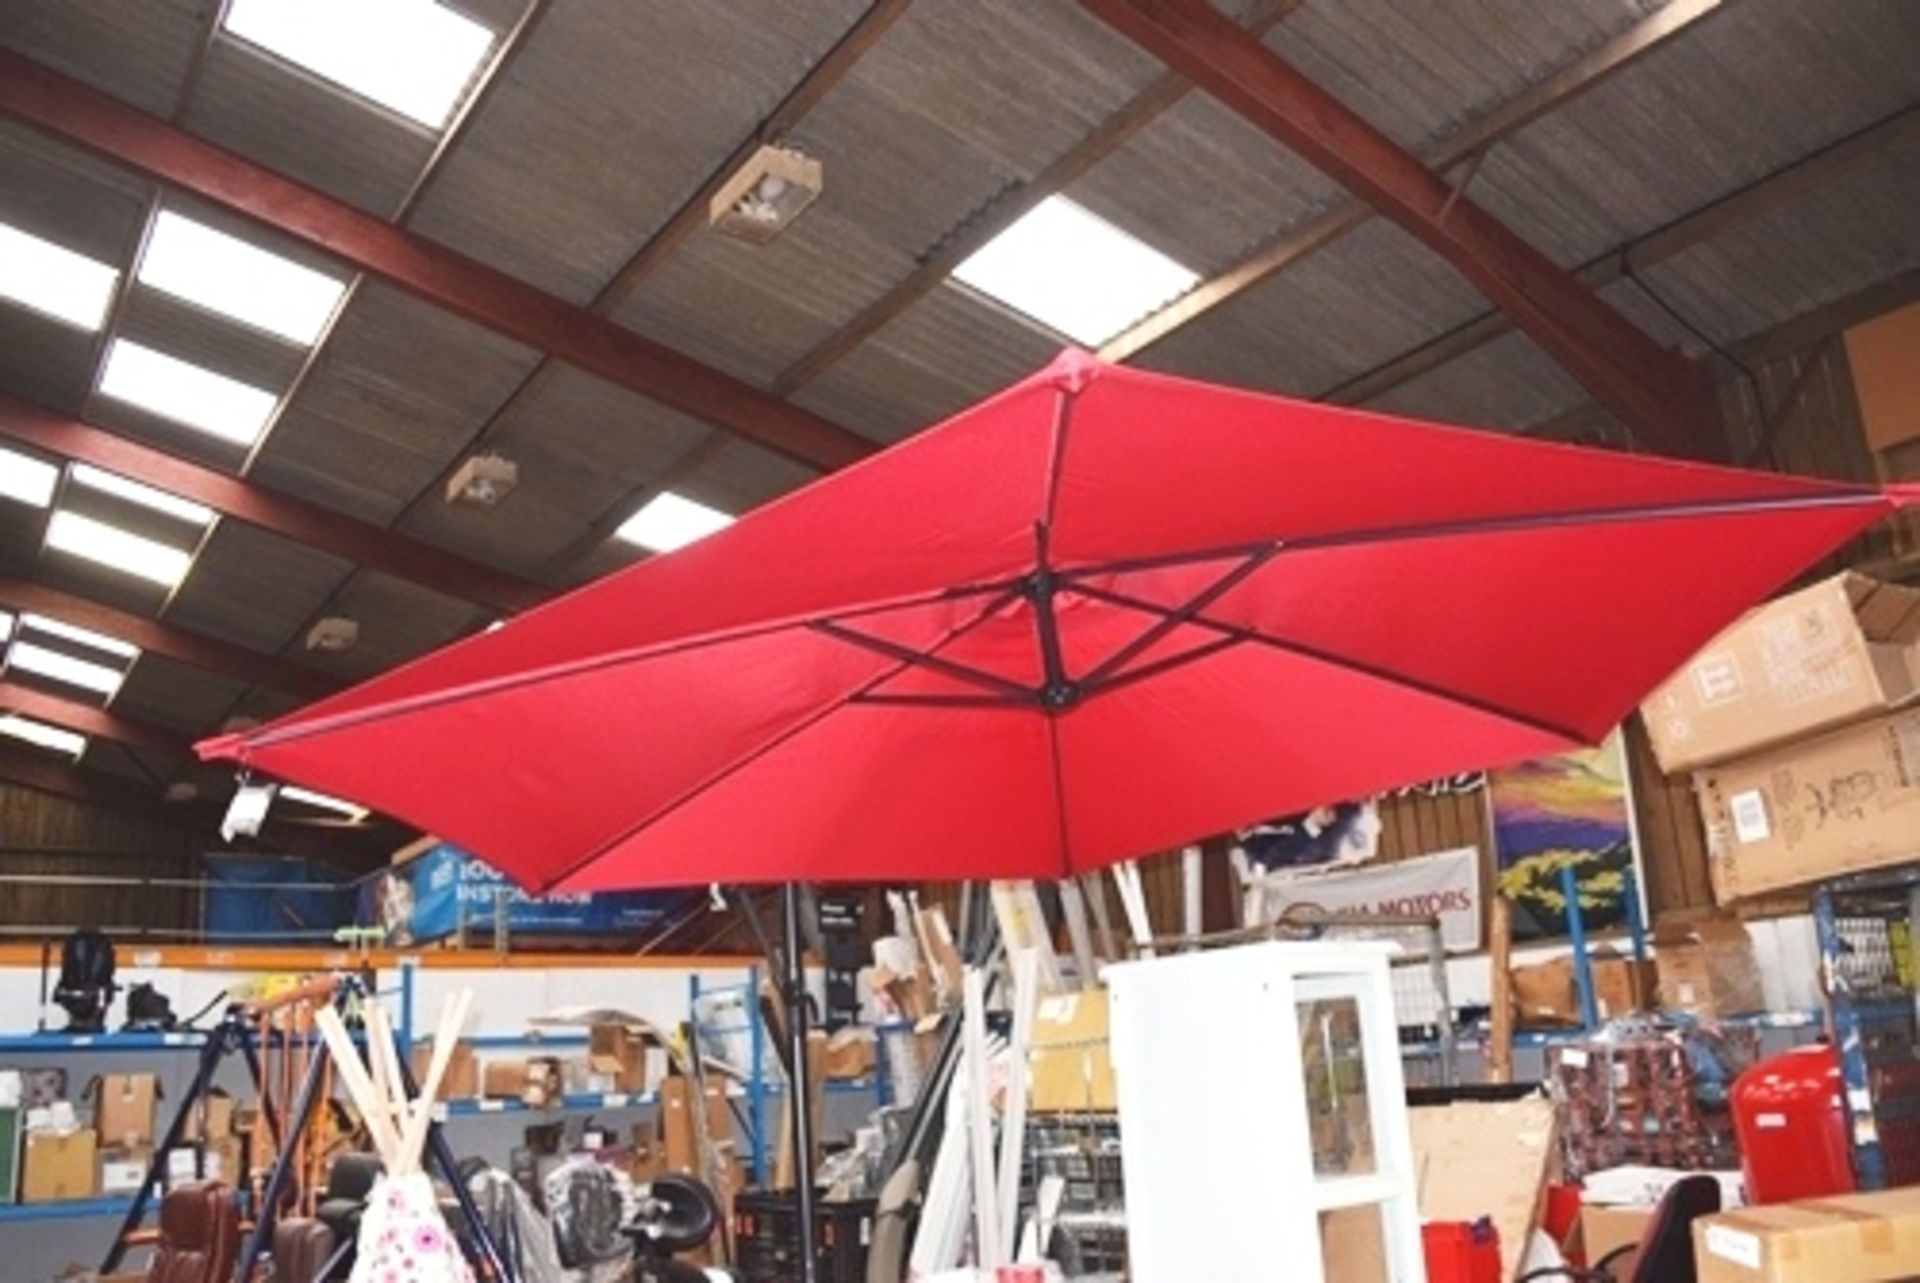 1 x Marko red over hanging 3m parasol - New (GS35)